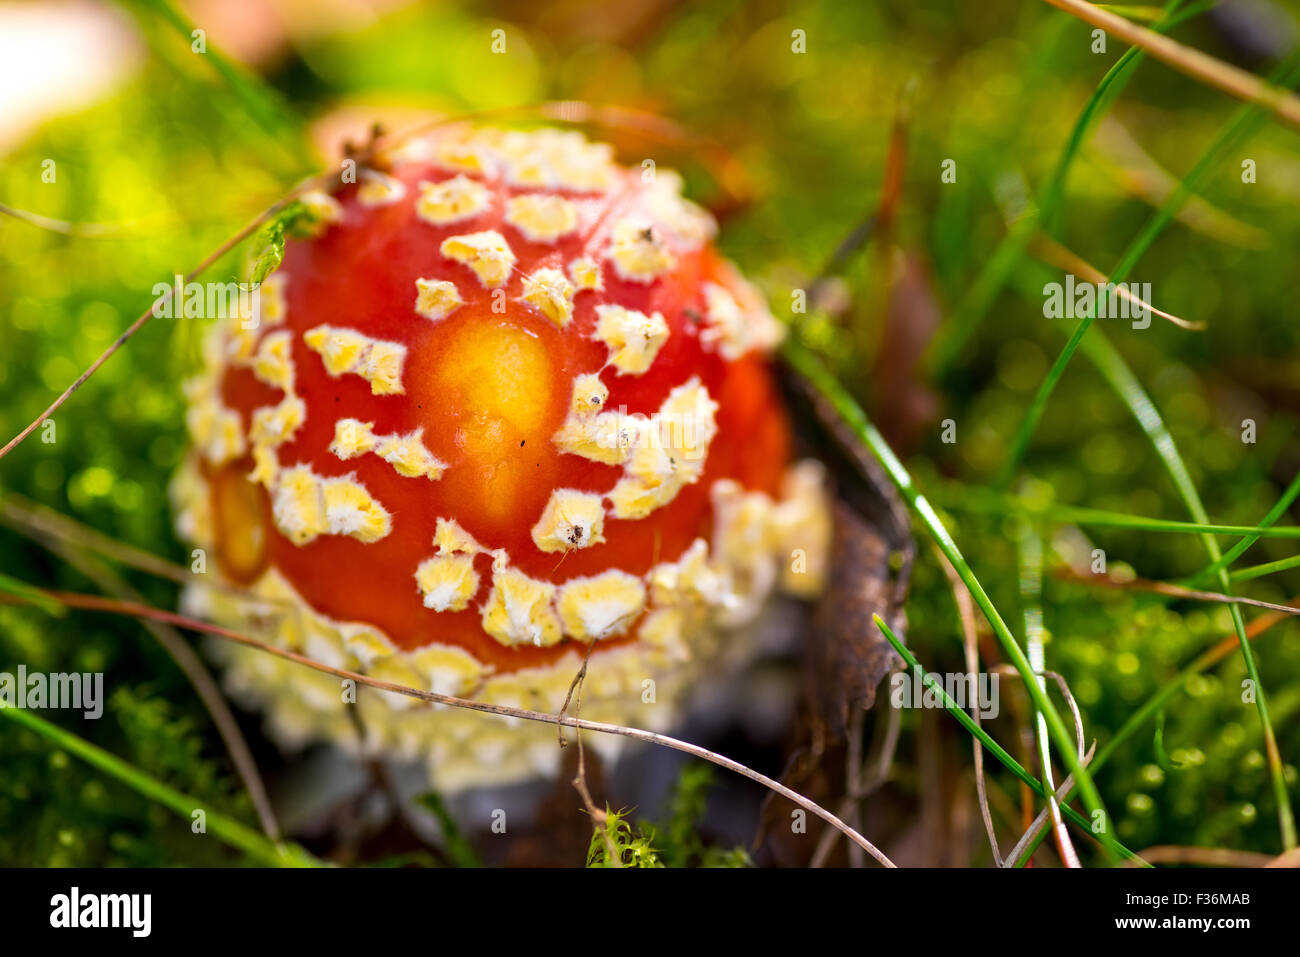 A Wild red Mushroom in the forest Cannock Staffordshire UK Stock Photo